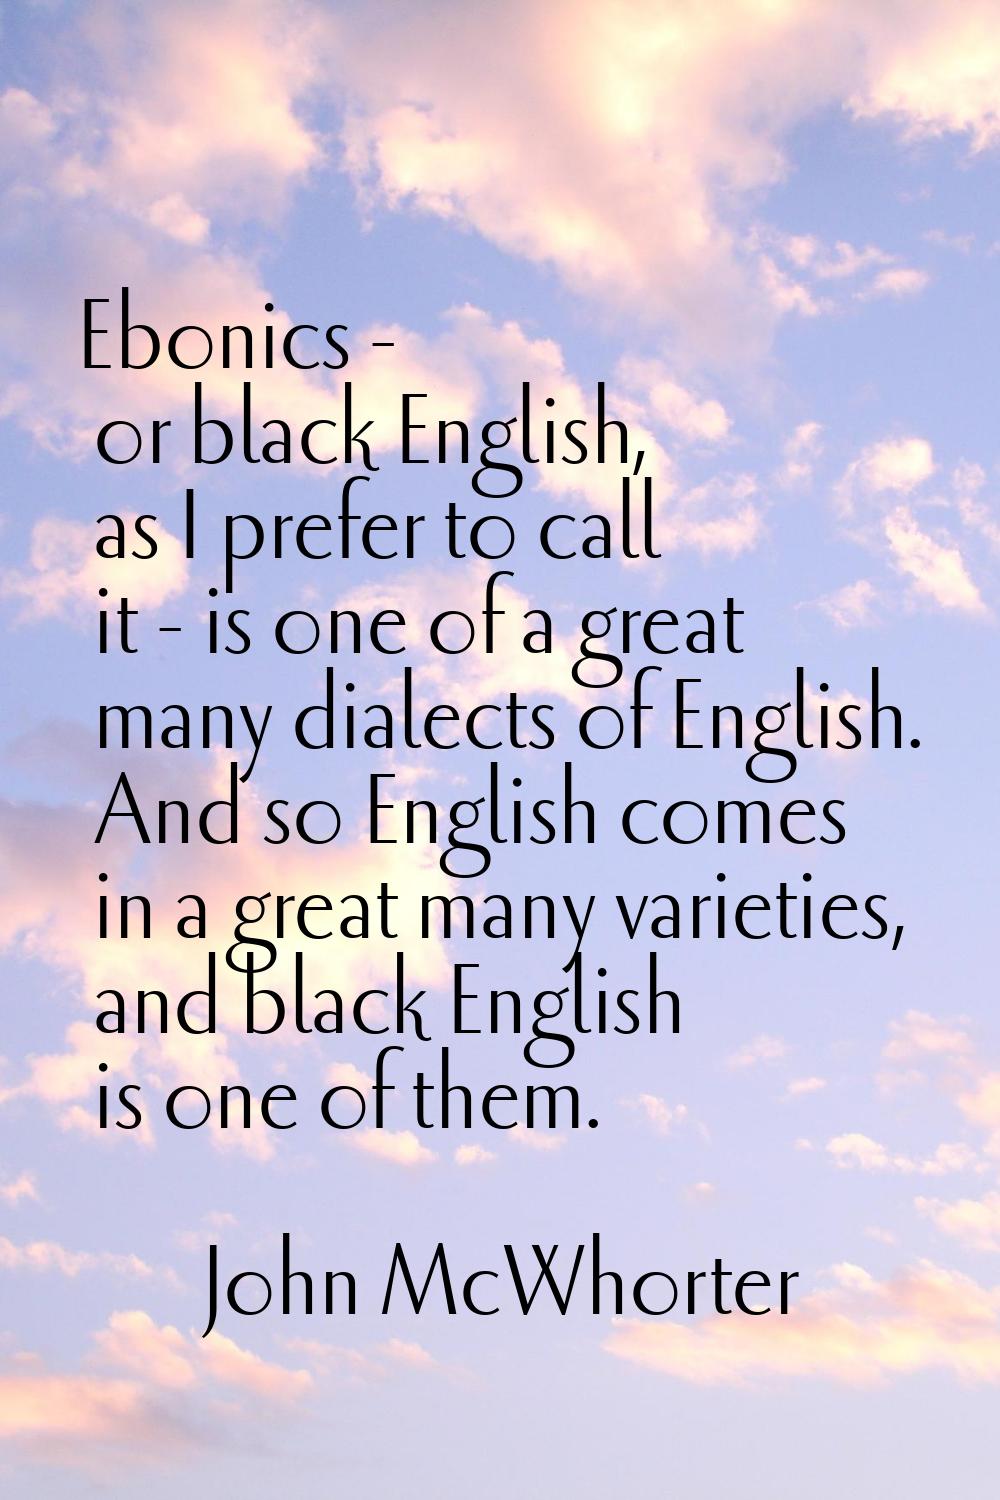 Ebonics - or black English, as I prefer to call it - is one of a great many dialects of English. An